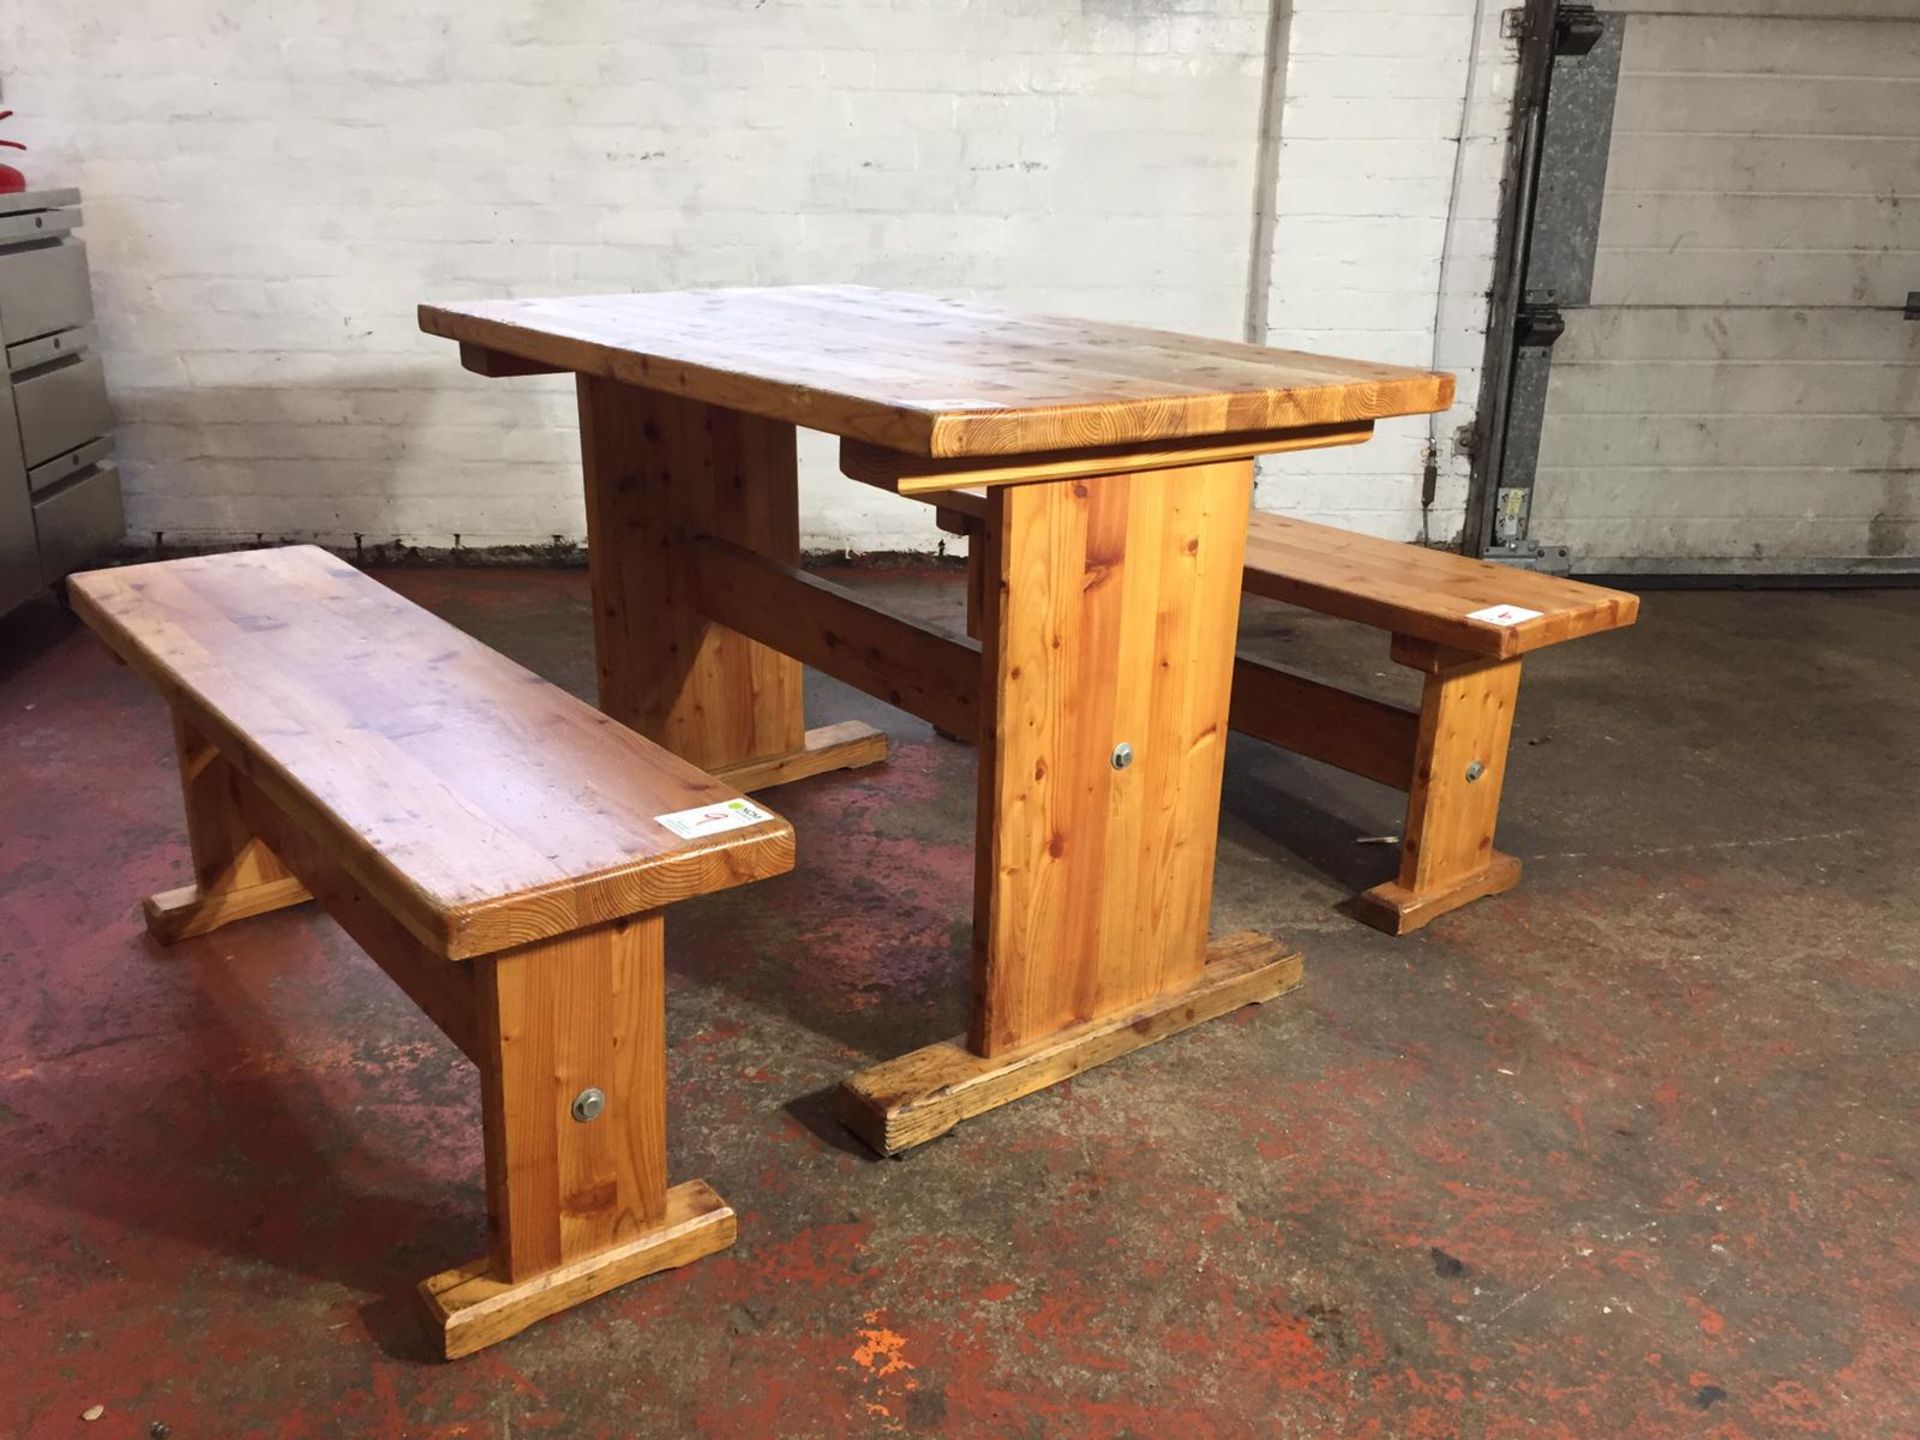 Pine Wooden Table with 2 Benches